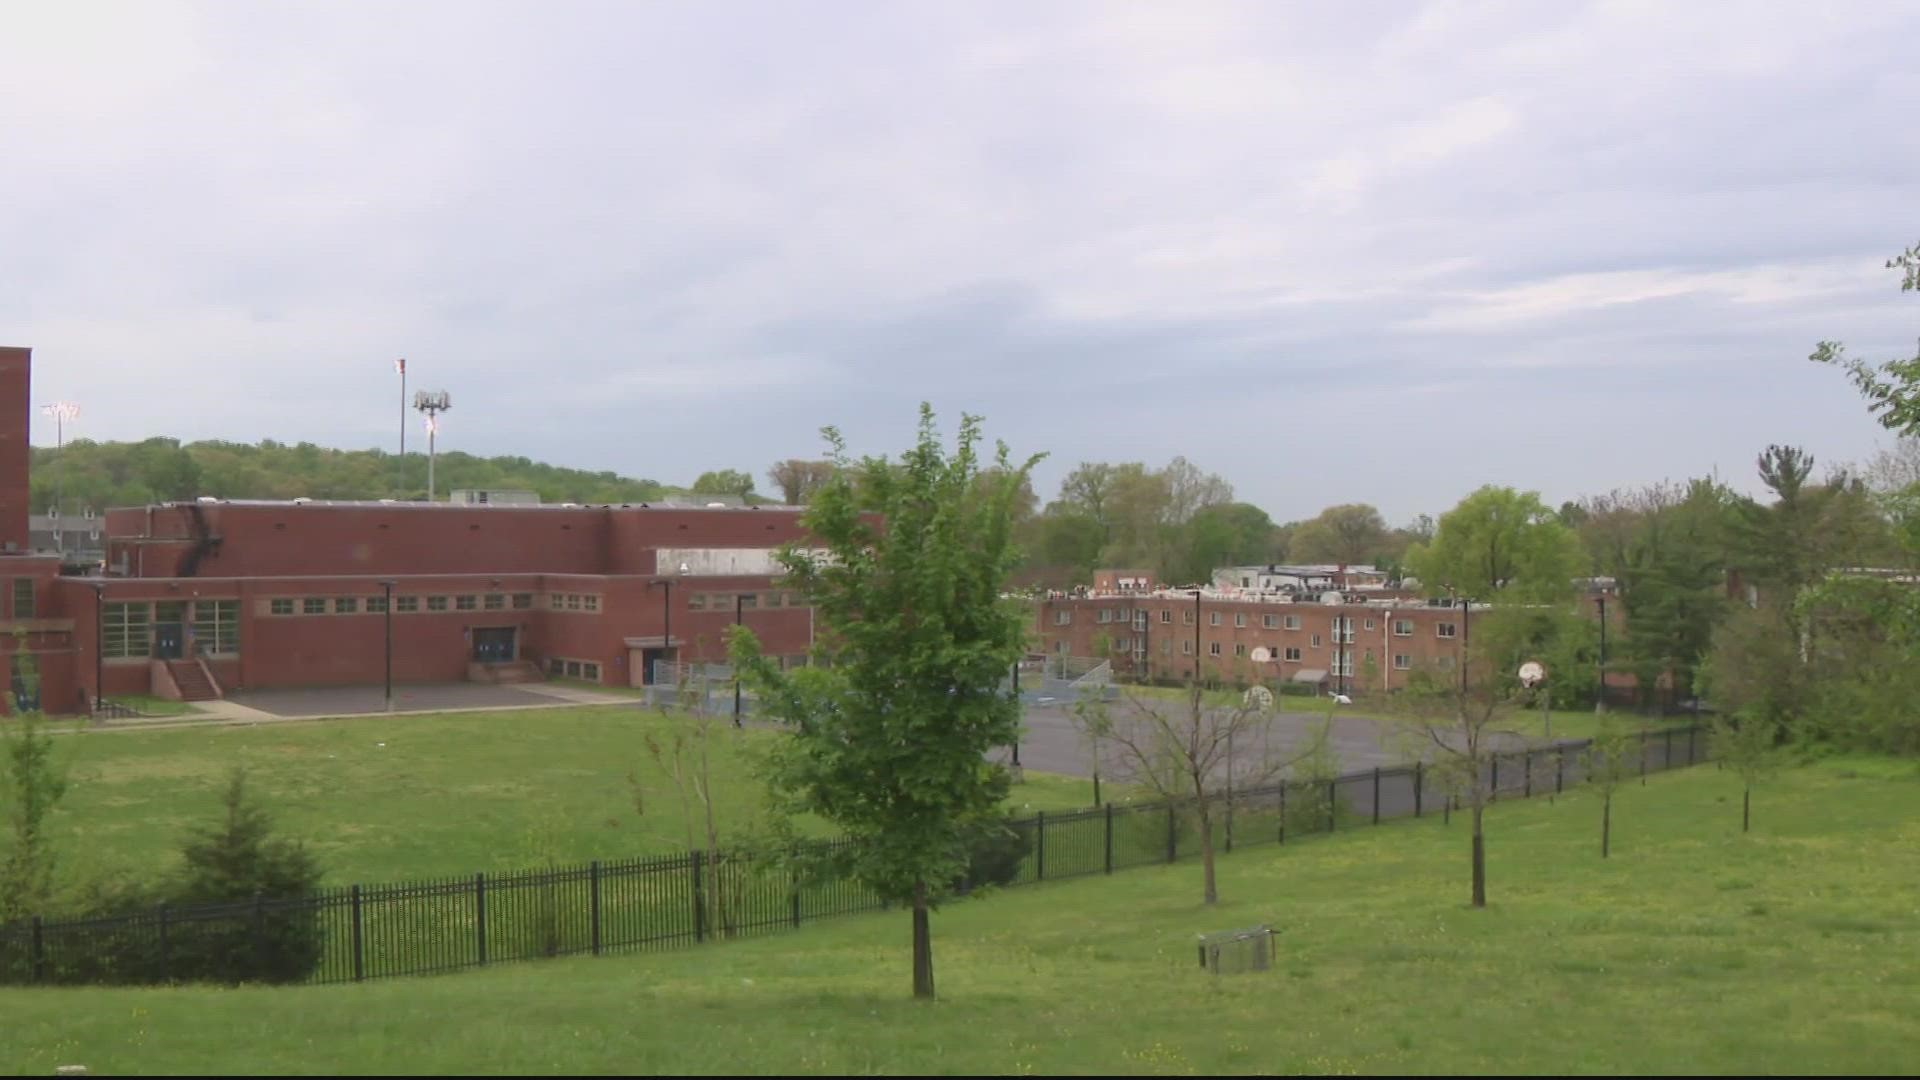 DCPS said students at Sousa Middle School, on Ely Place SE, had to be placed on lockdown for close to thirty minutes.